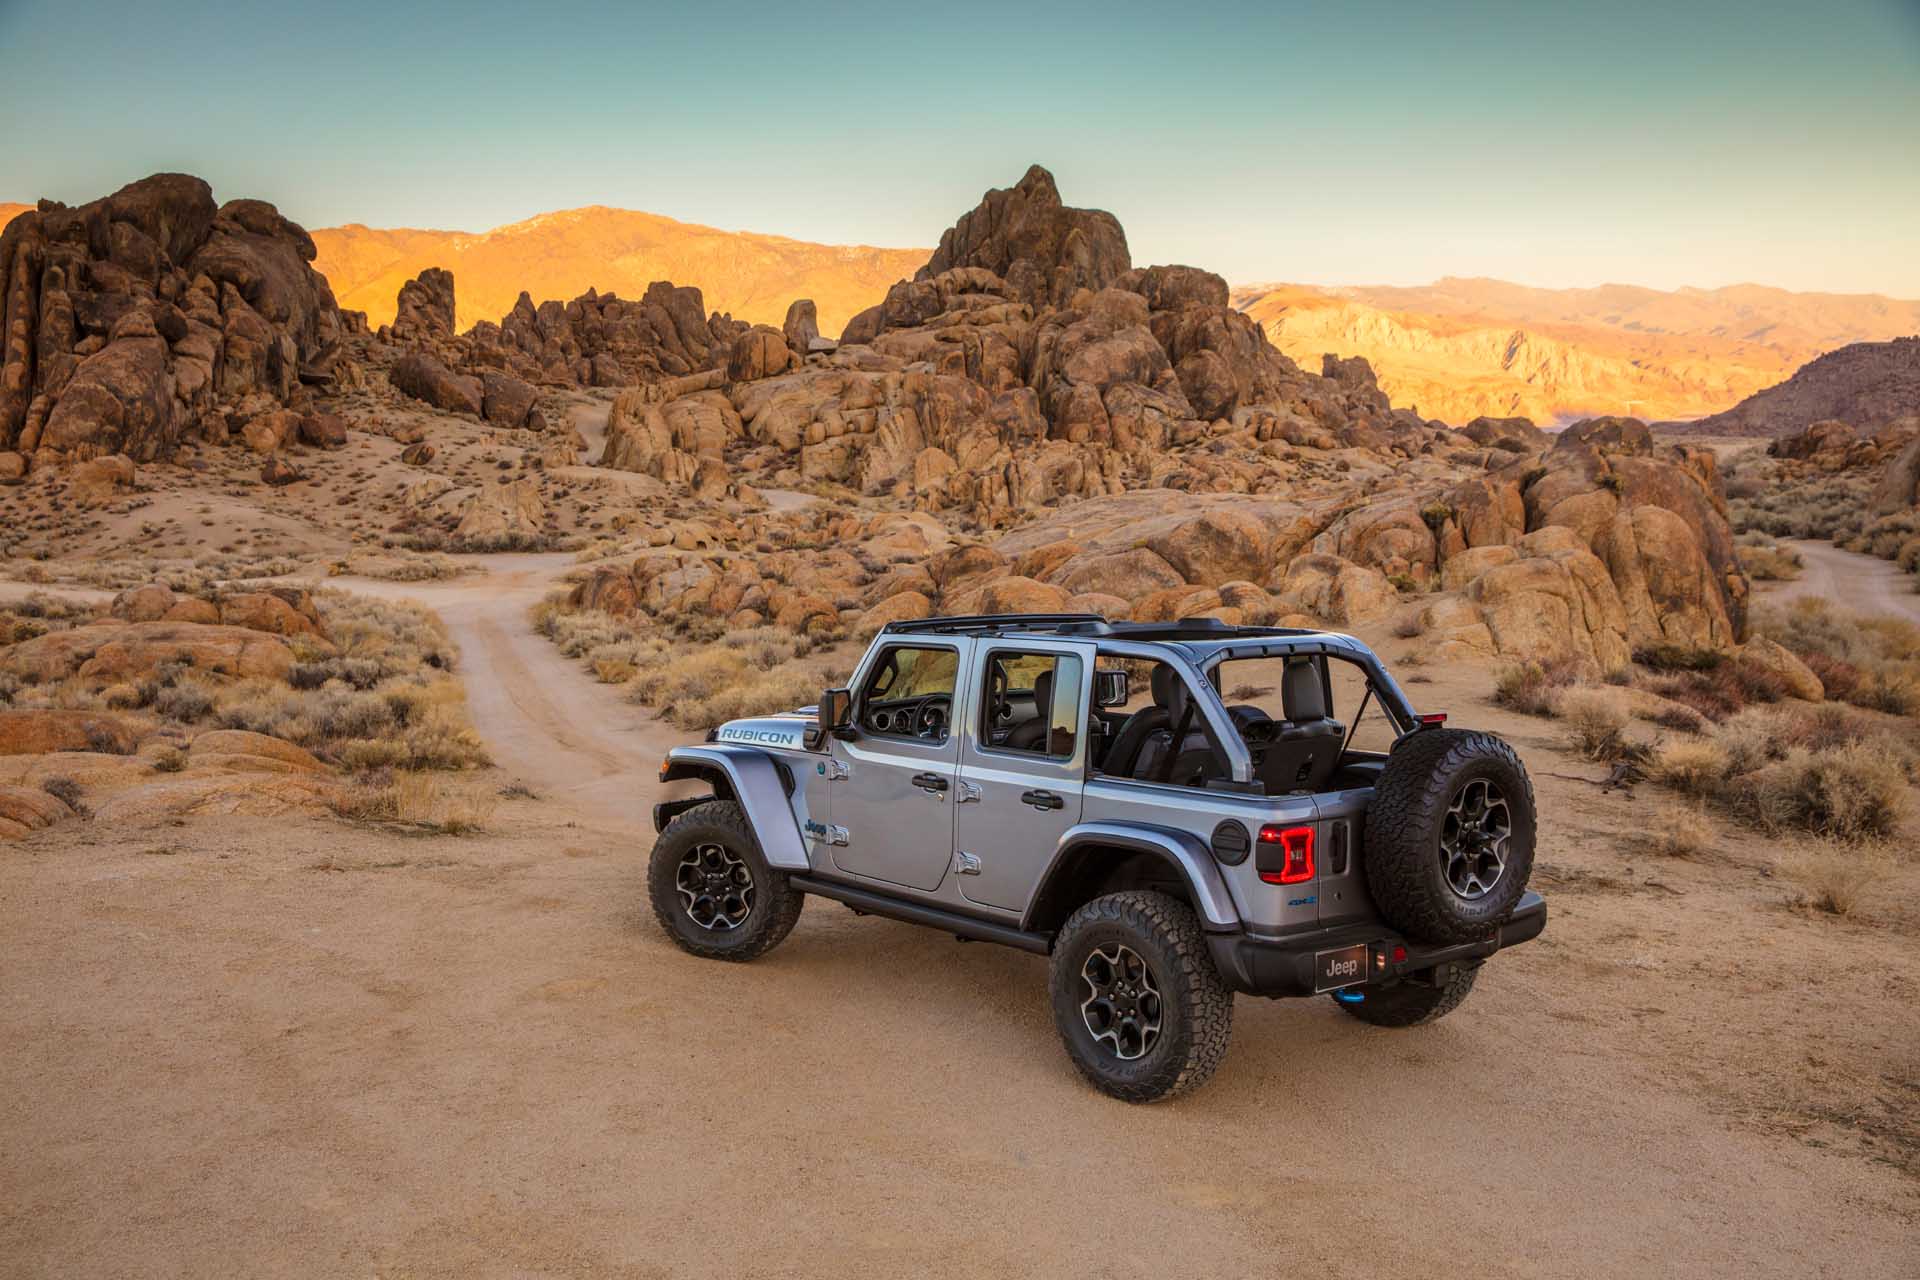 21 Jeep Wrangler 4xe Plug In Hybrid Will Electrify Off Roading In A Way Nothing Else Has Yet